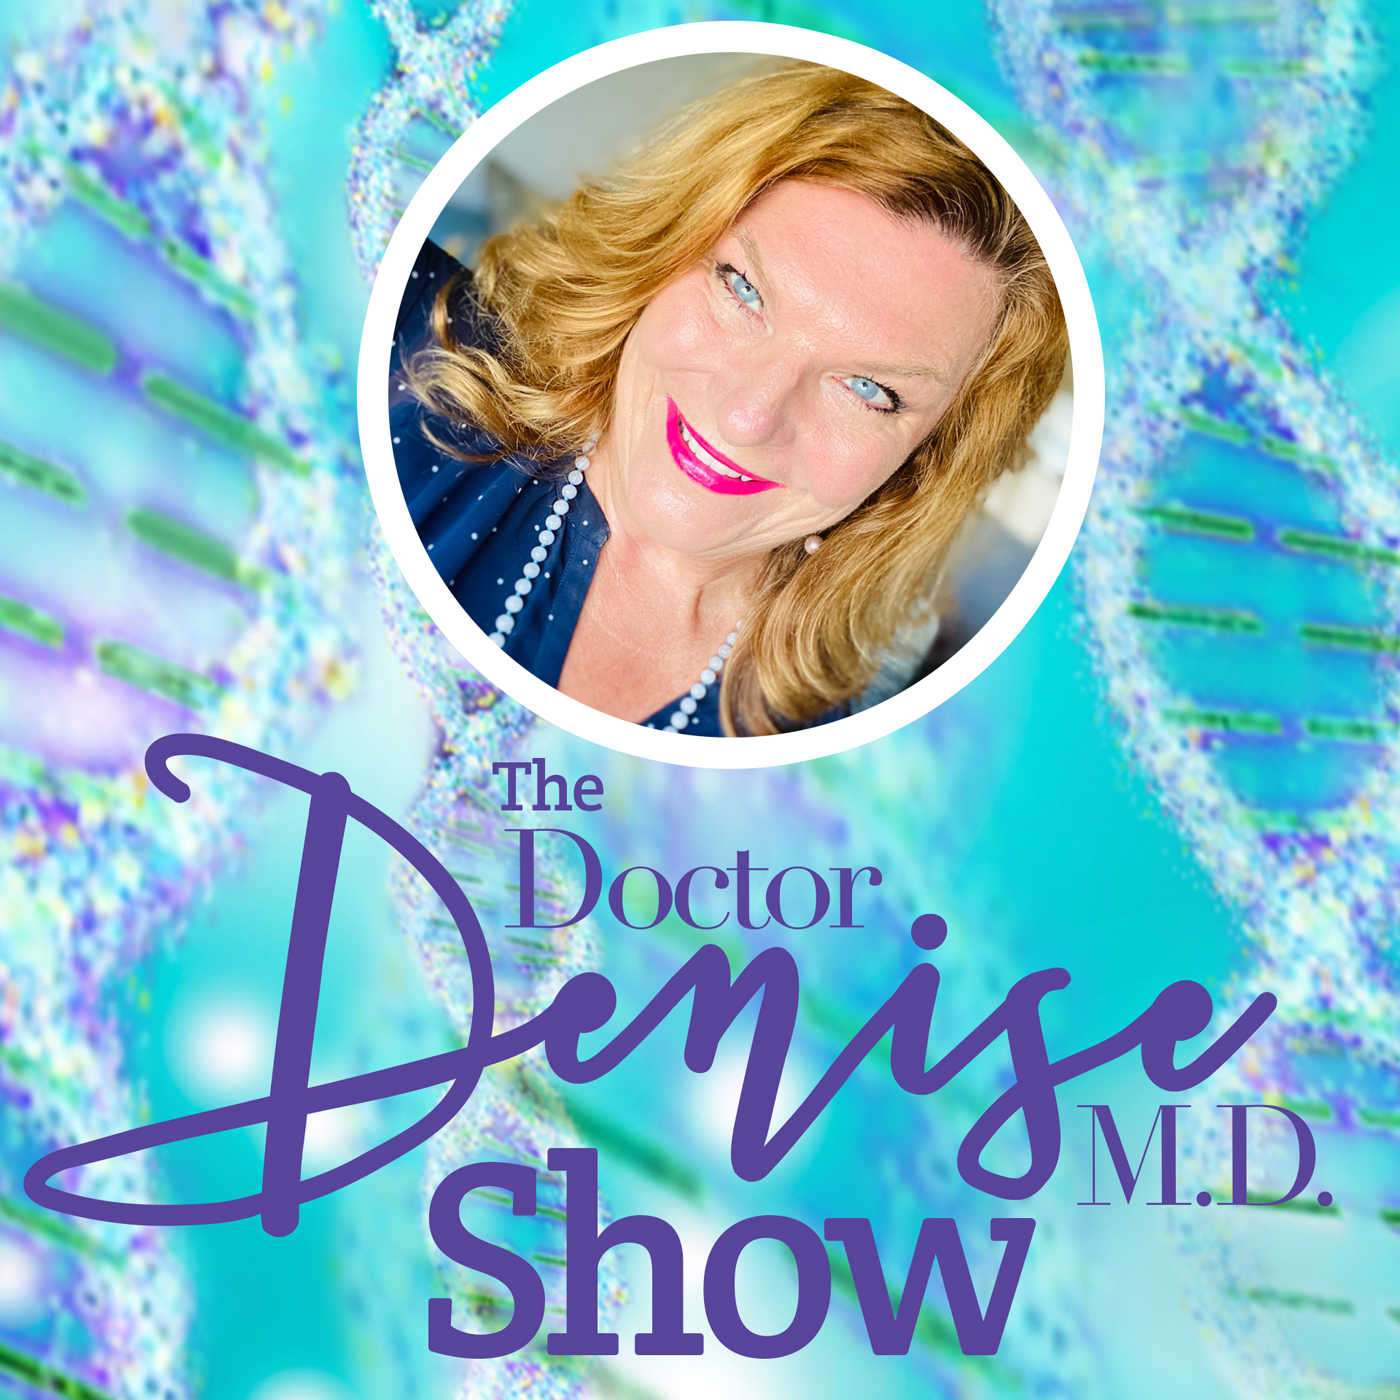 The Dr. Denise Show